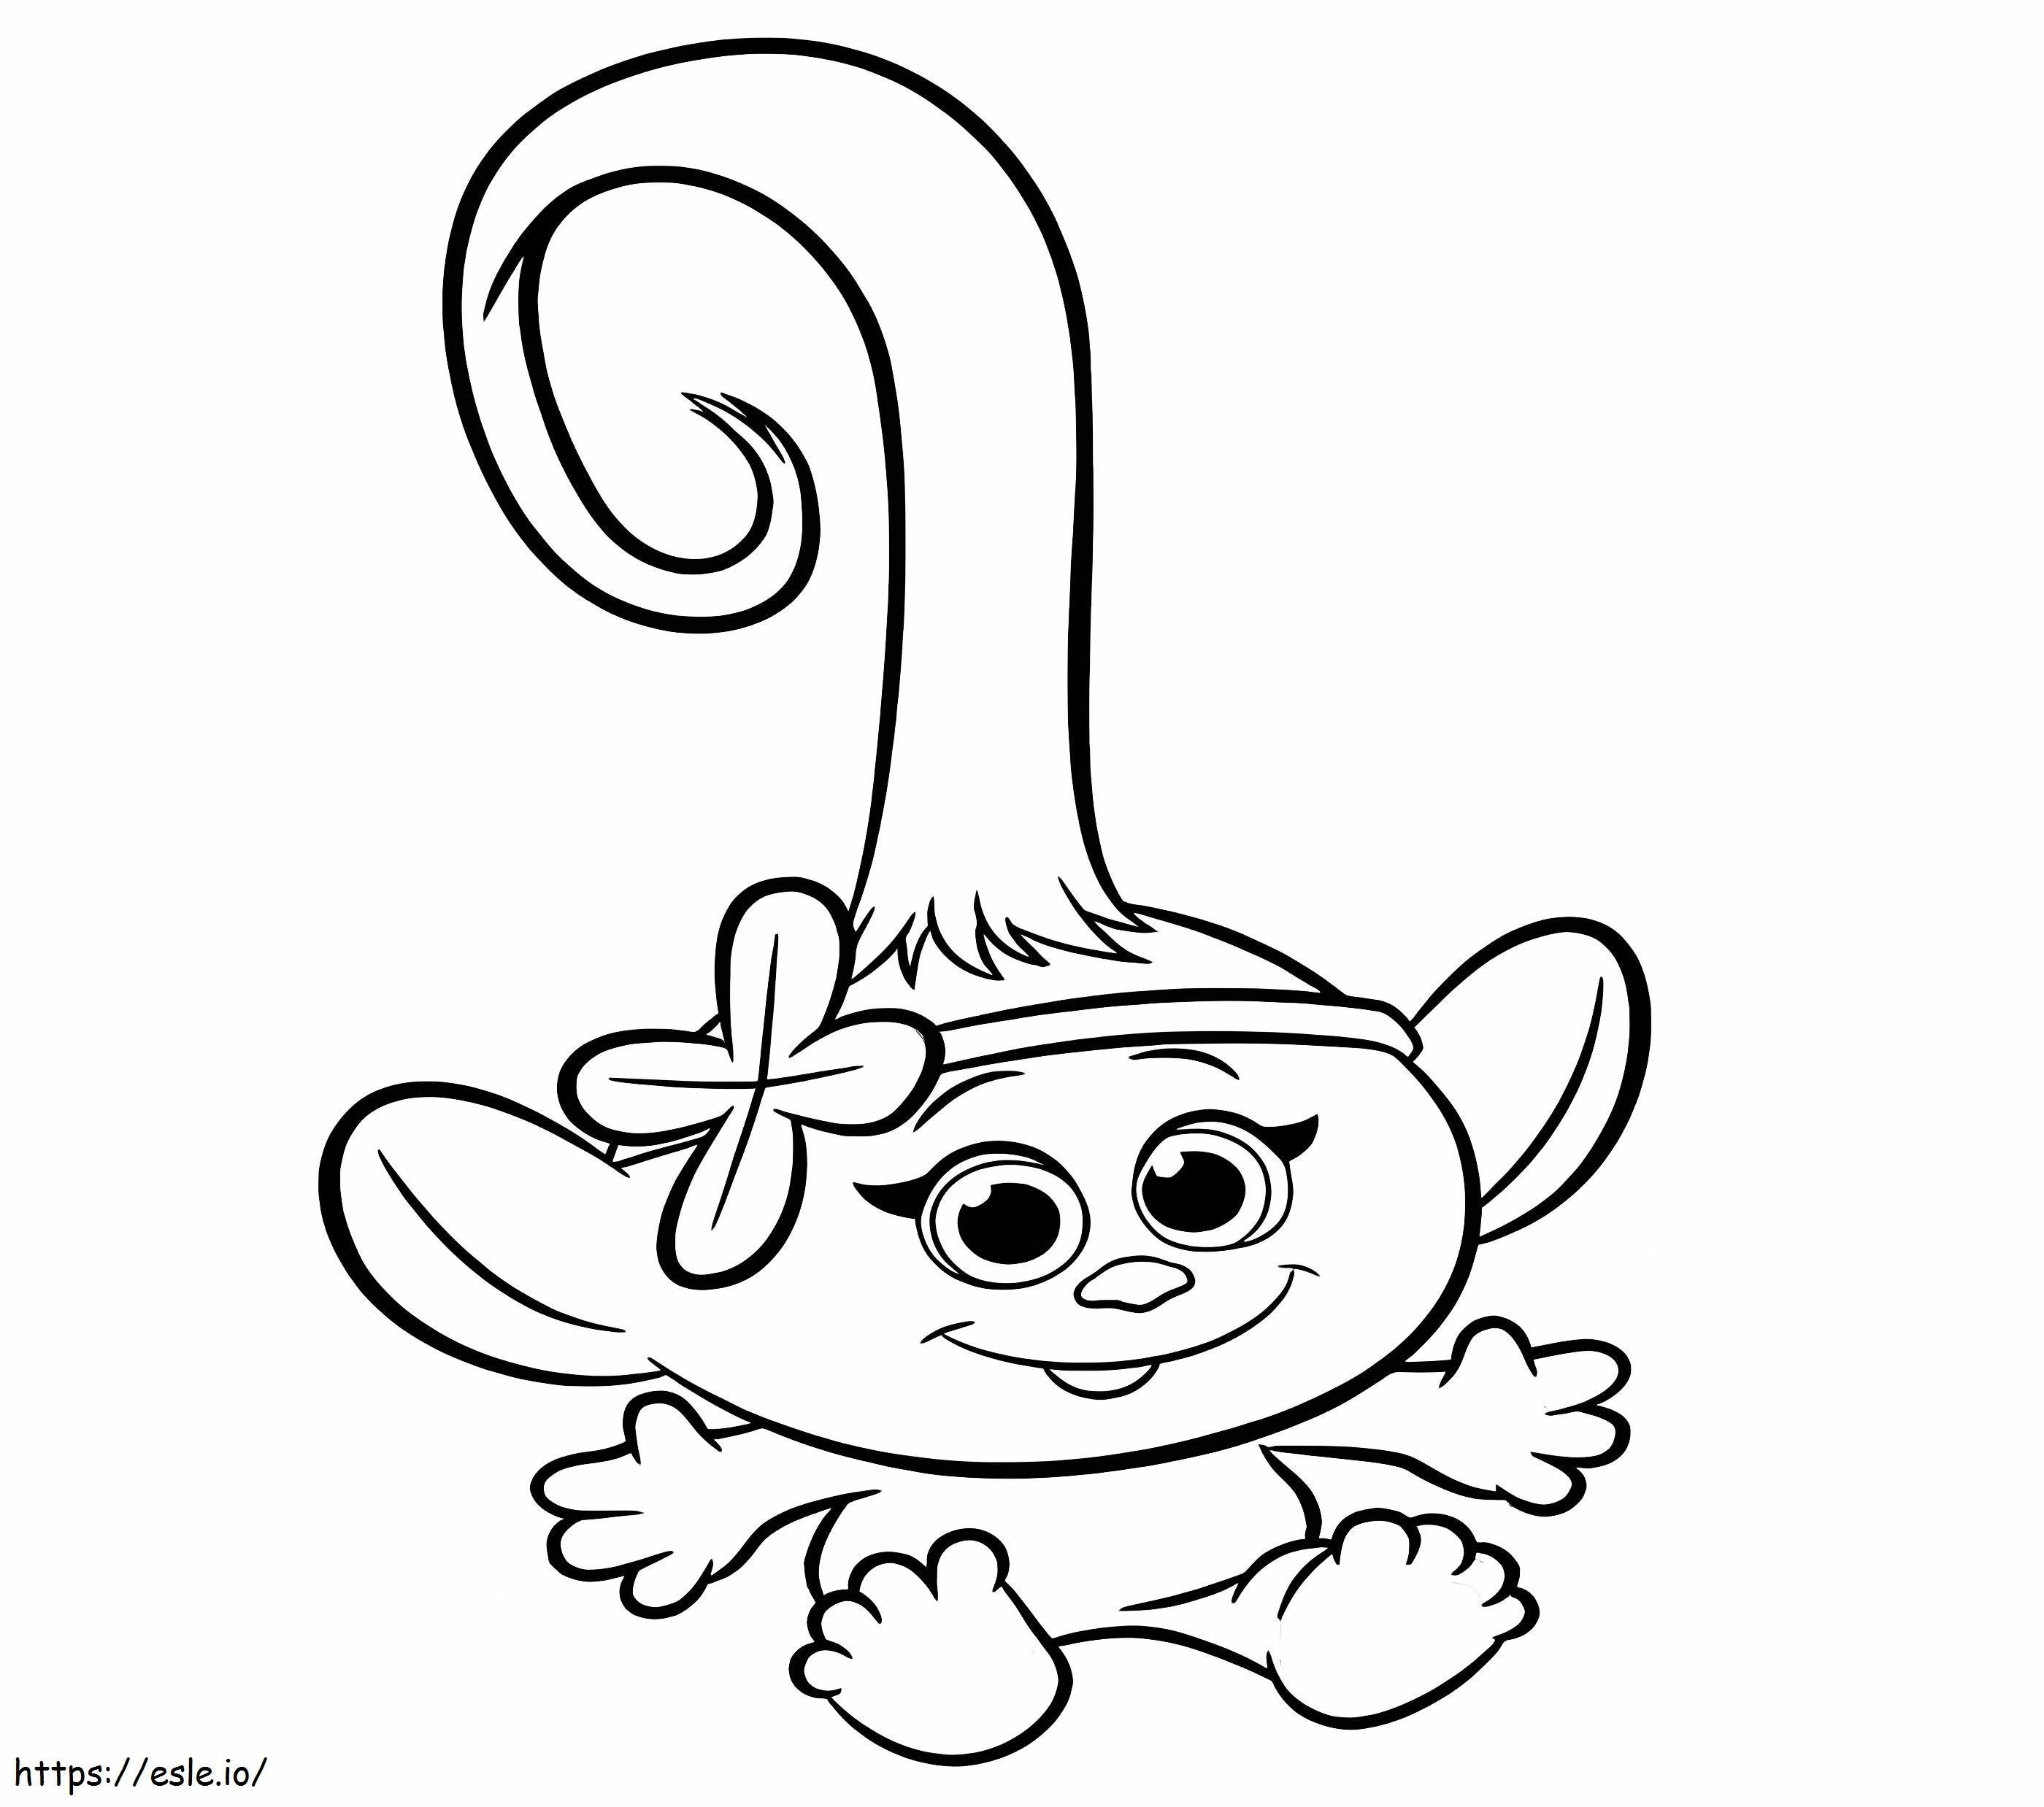 Cute Baby Poppy coloring page